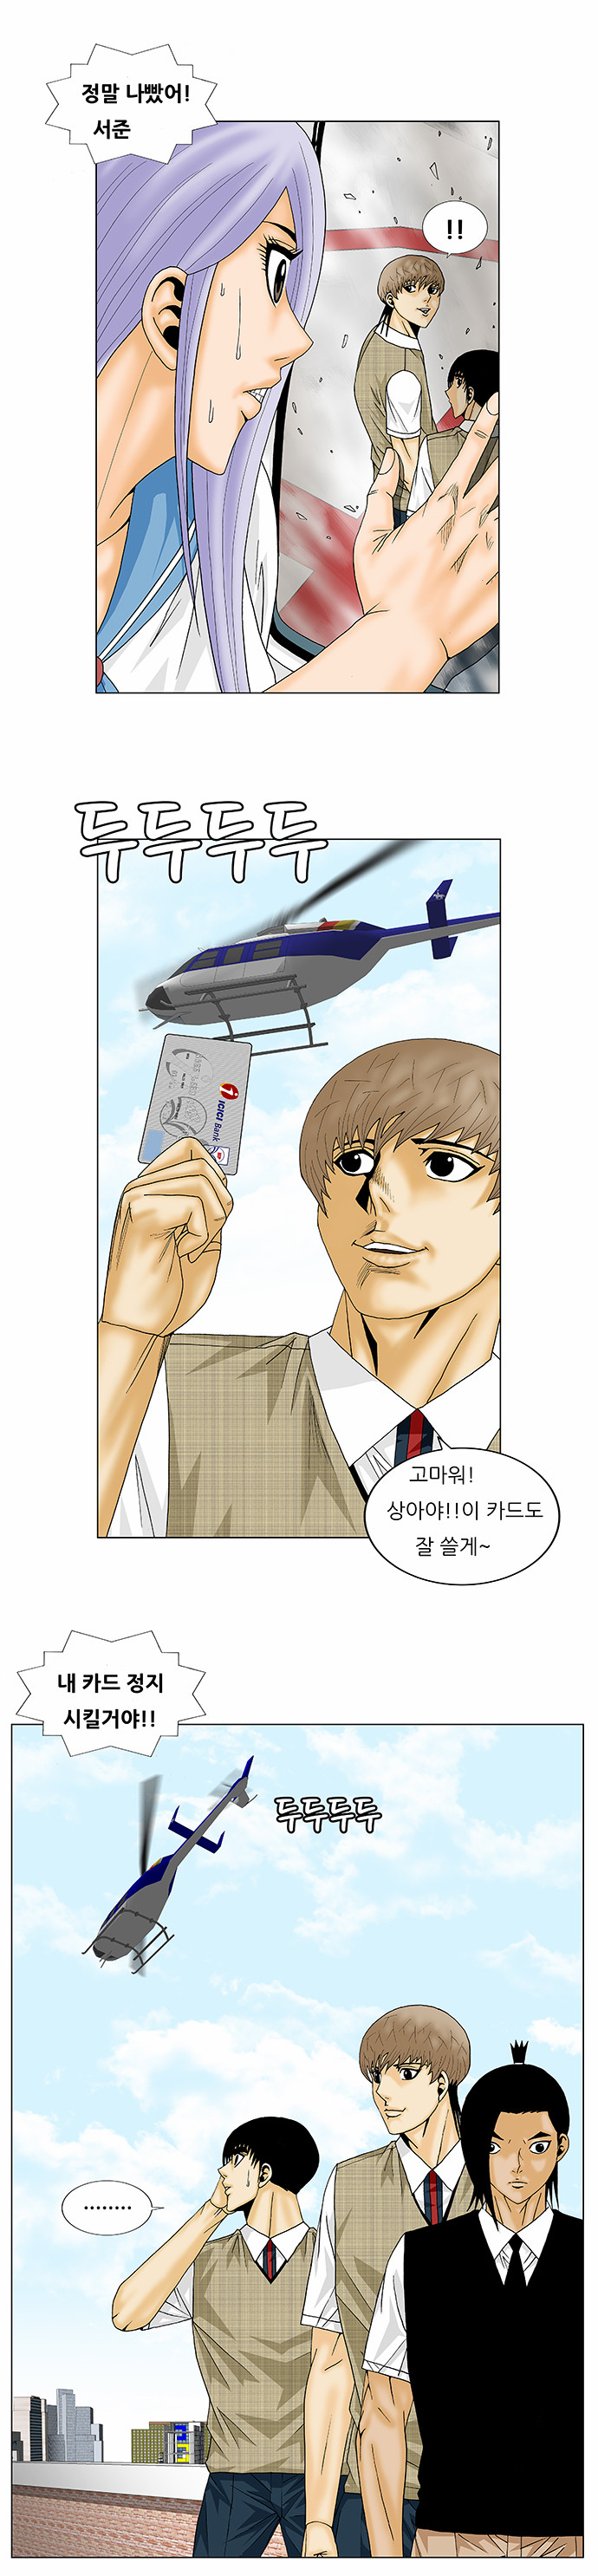 Ultimate Legend - Kang Hae Hyo - Chapter 139 - Page 3